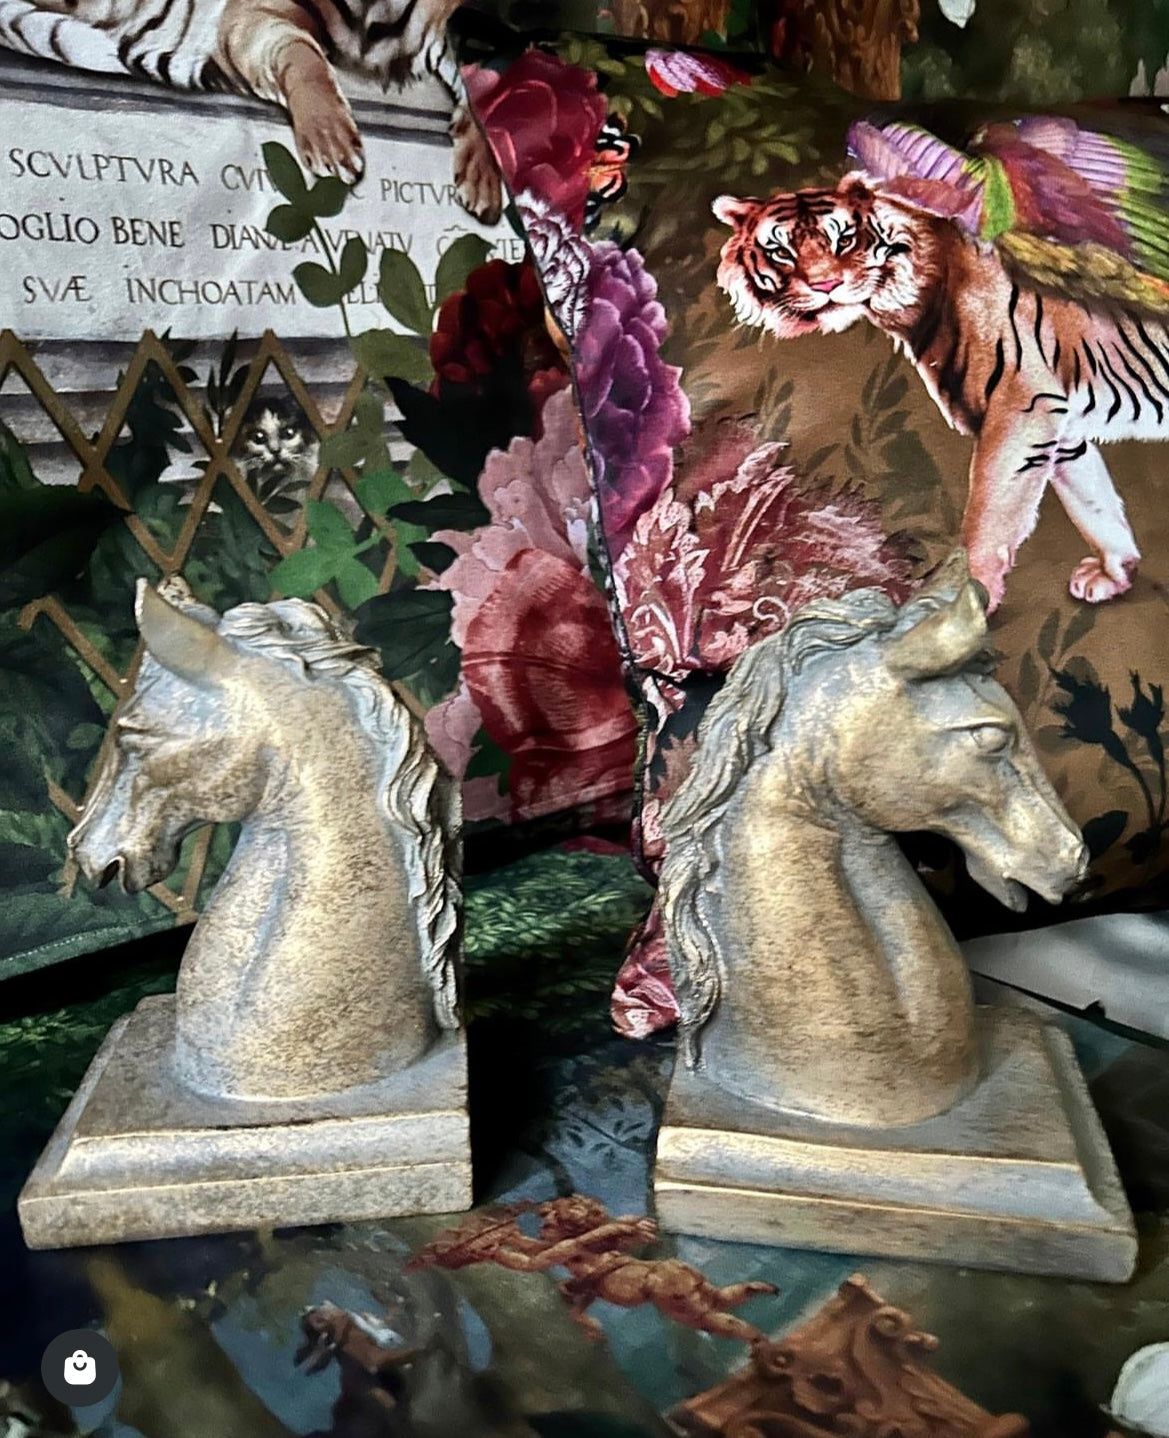 Pair of horse bookends